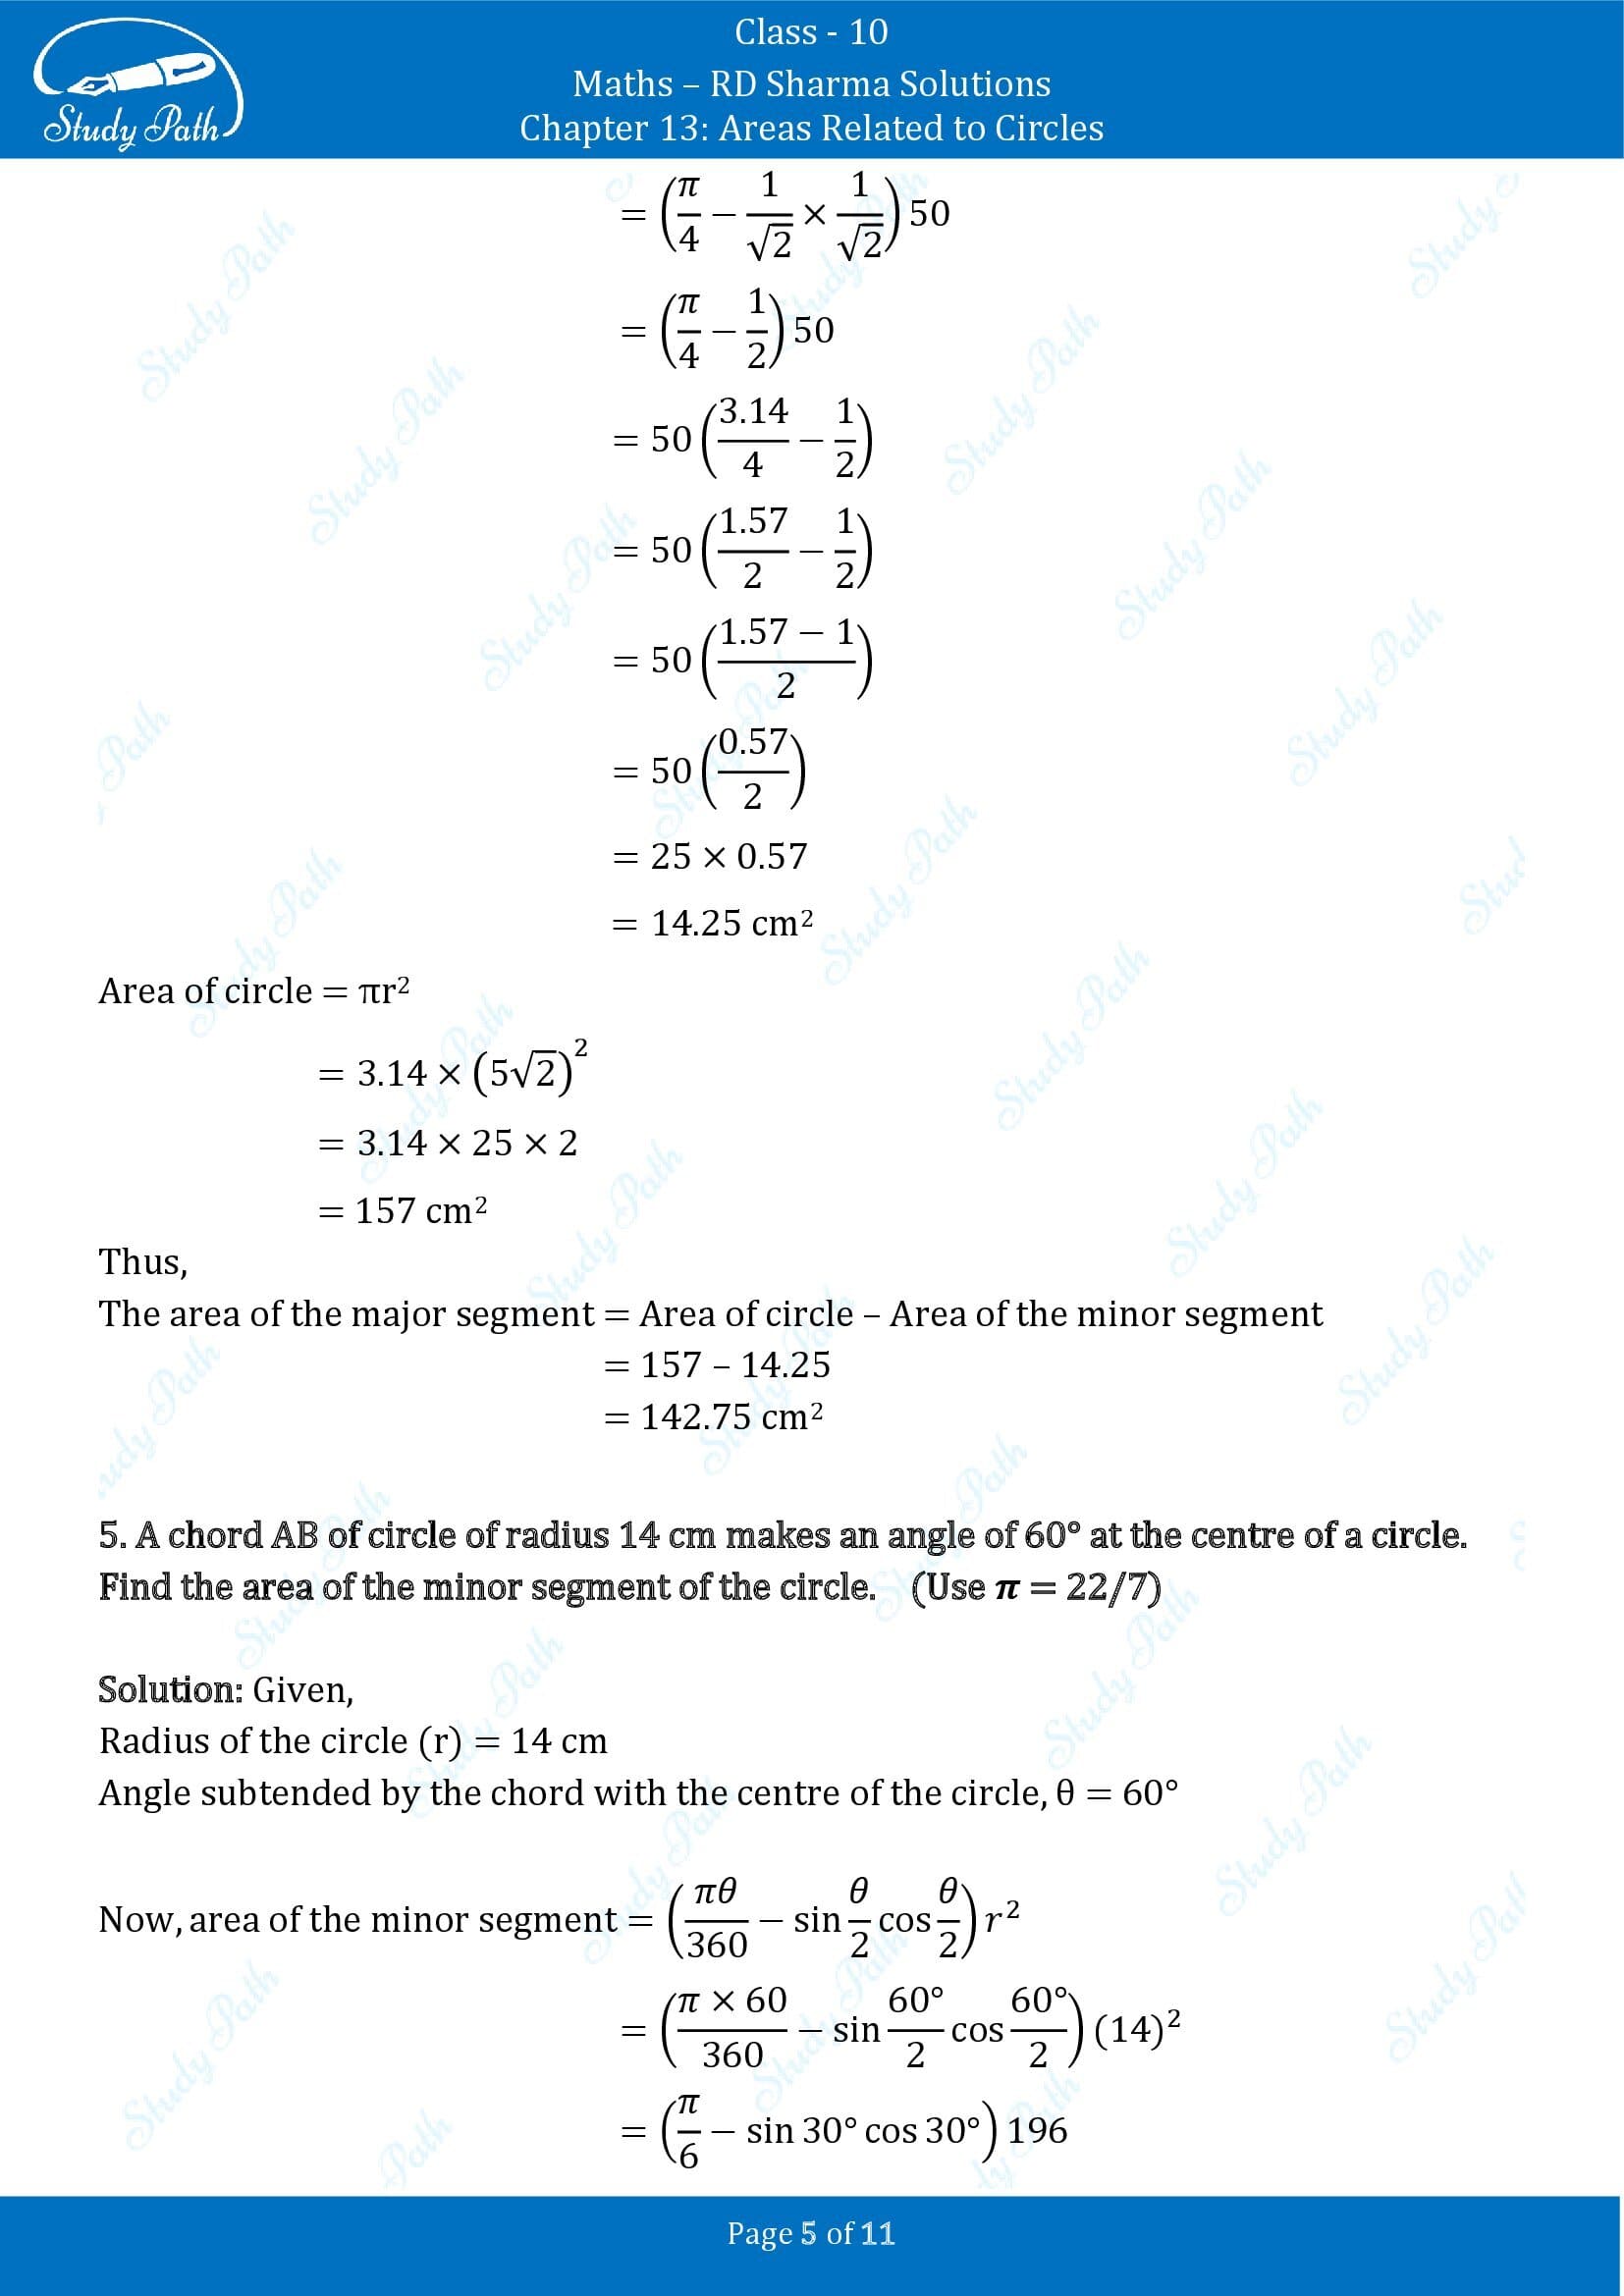 RD Sharma Solutions Class 10 Chapter 13 Areas Related to Circles Exercise 13.3 00005